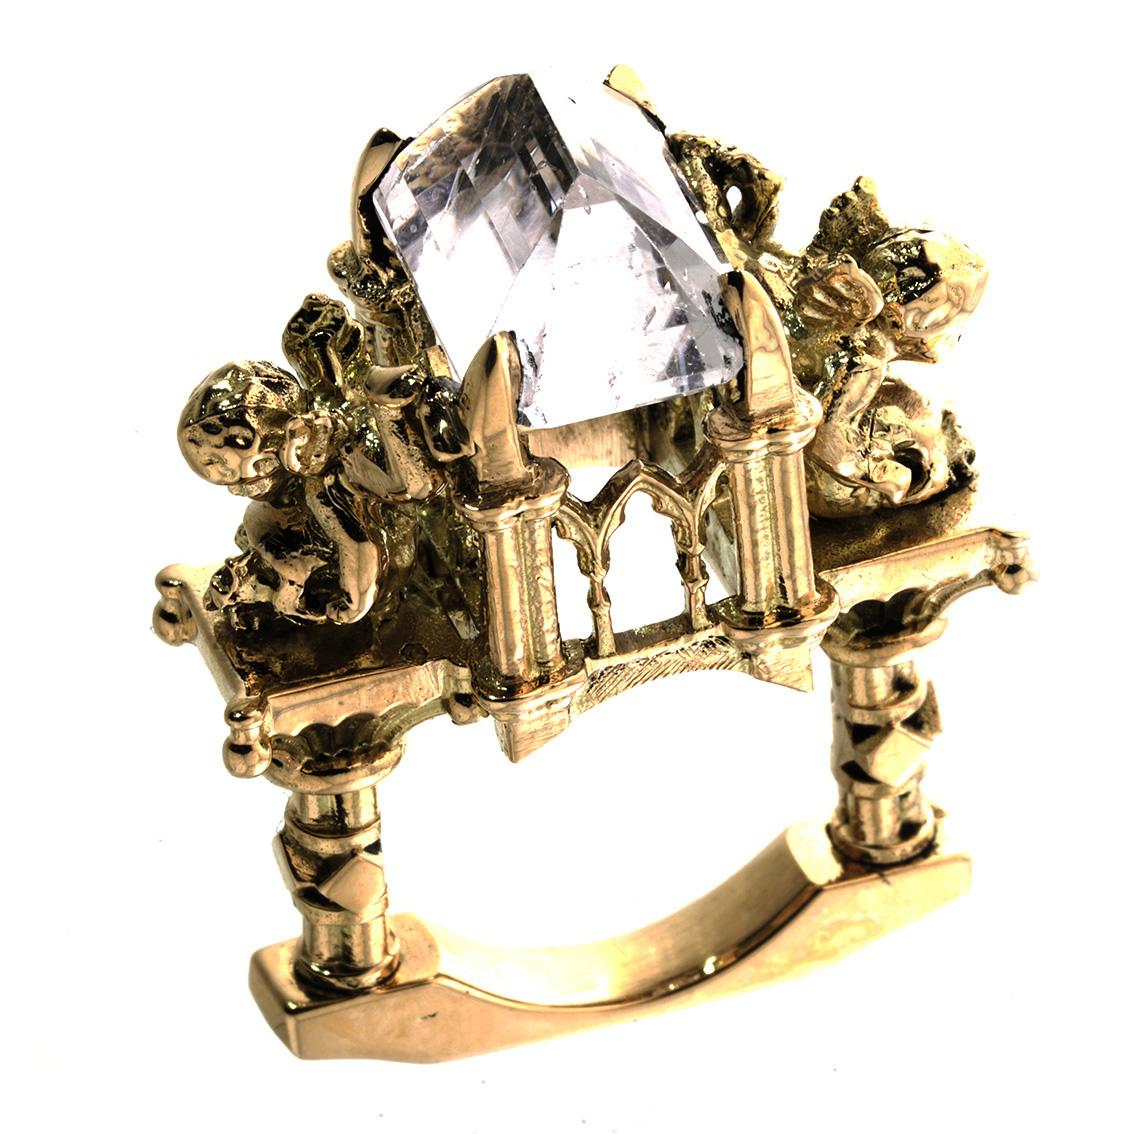 The Effervescent Temptress Cathedral Ring awakens the senses with it's inherent beauty. This radiant ring is one of a kind and fits a size US 5 1/2 (Australian & British size L).

Handcrafted with delightful, 18kt yellow gold this vibrant ring